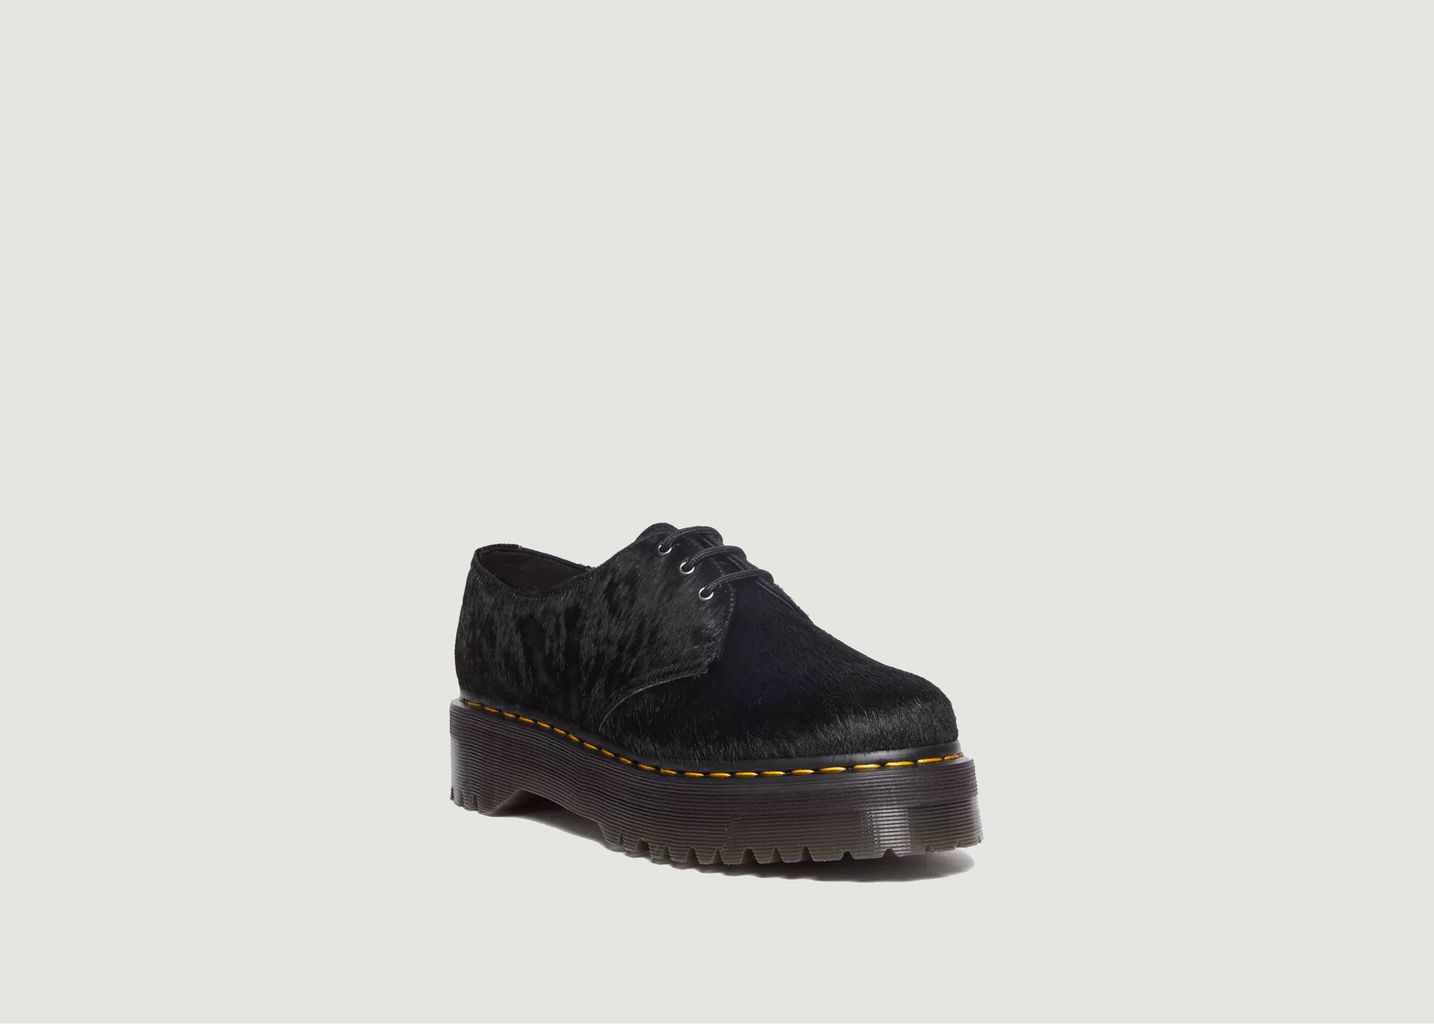 Chaussures 1461 Quad Hair-On - Dr. Martens